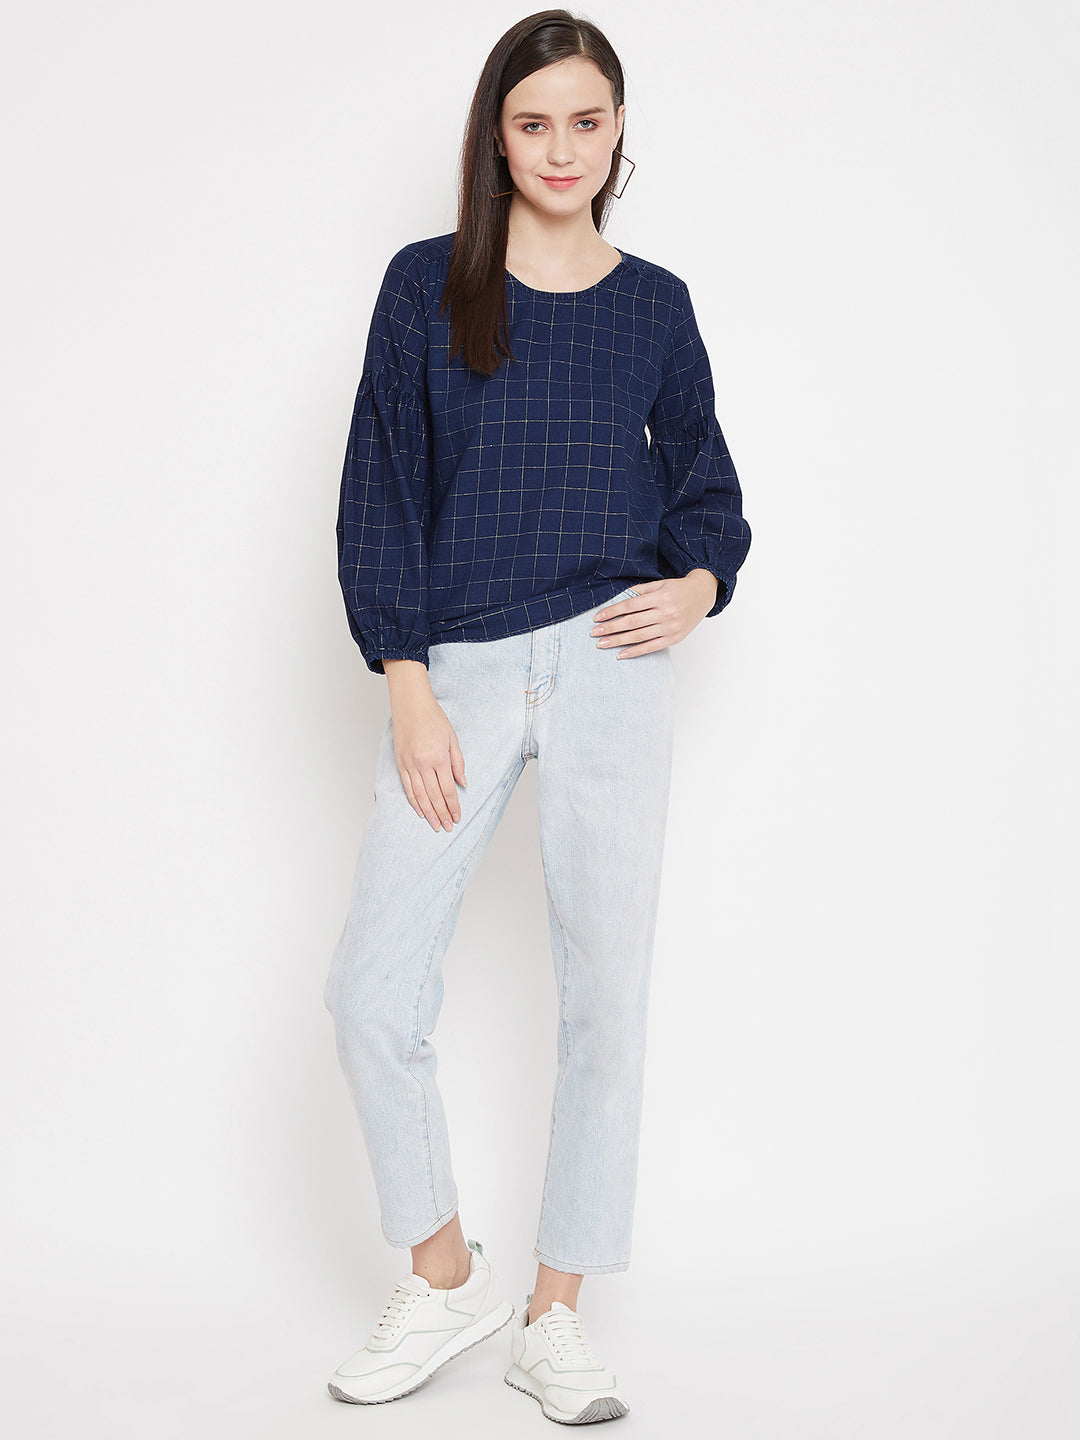 Navy Blue Checked Round Neck Tops - Women Tops